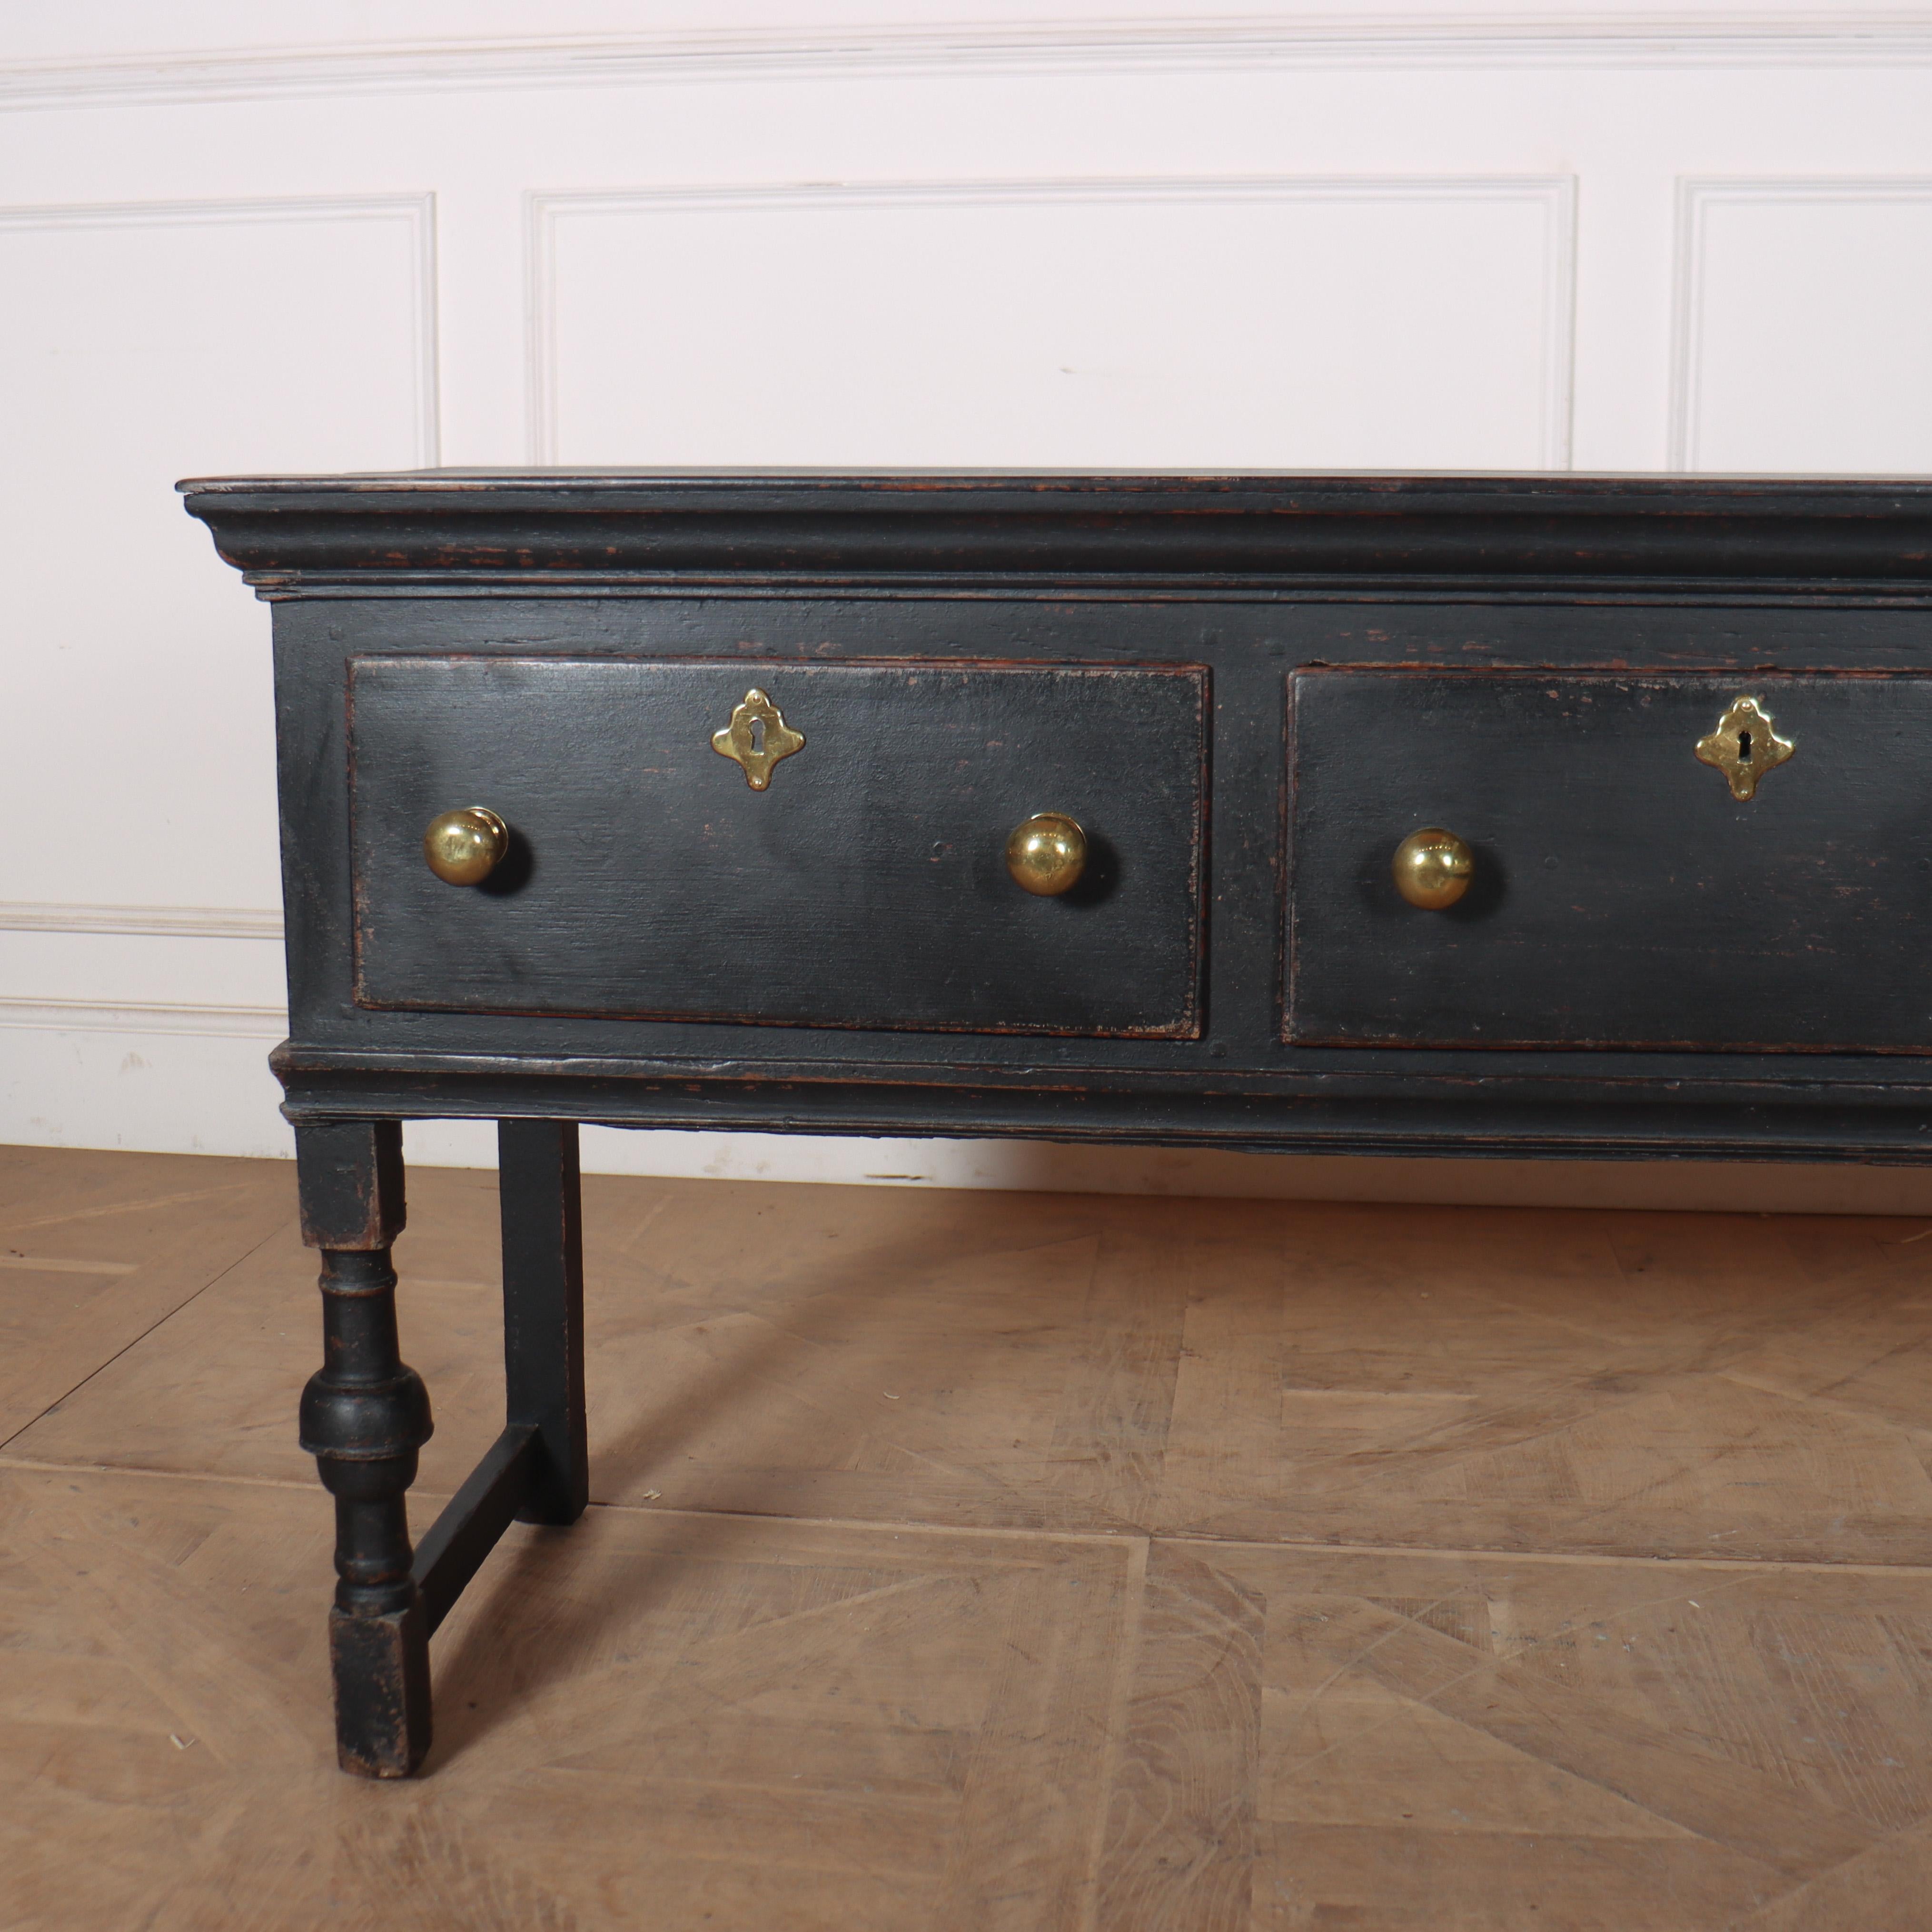 18th C English painted three drawer oak dresser base. 1780.

Reference: 8249

Dimensions
65 inches (165 cms) Wide
20 inches (51 cms) Deep
30.5 inches (77 cms) High